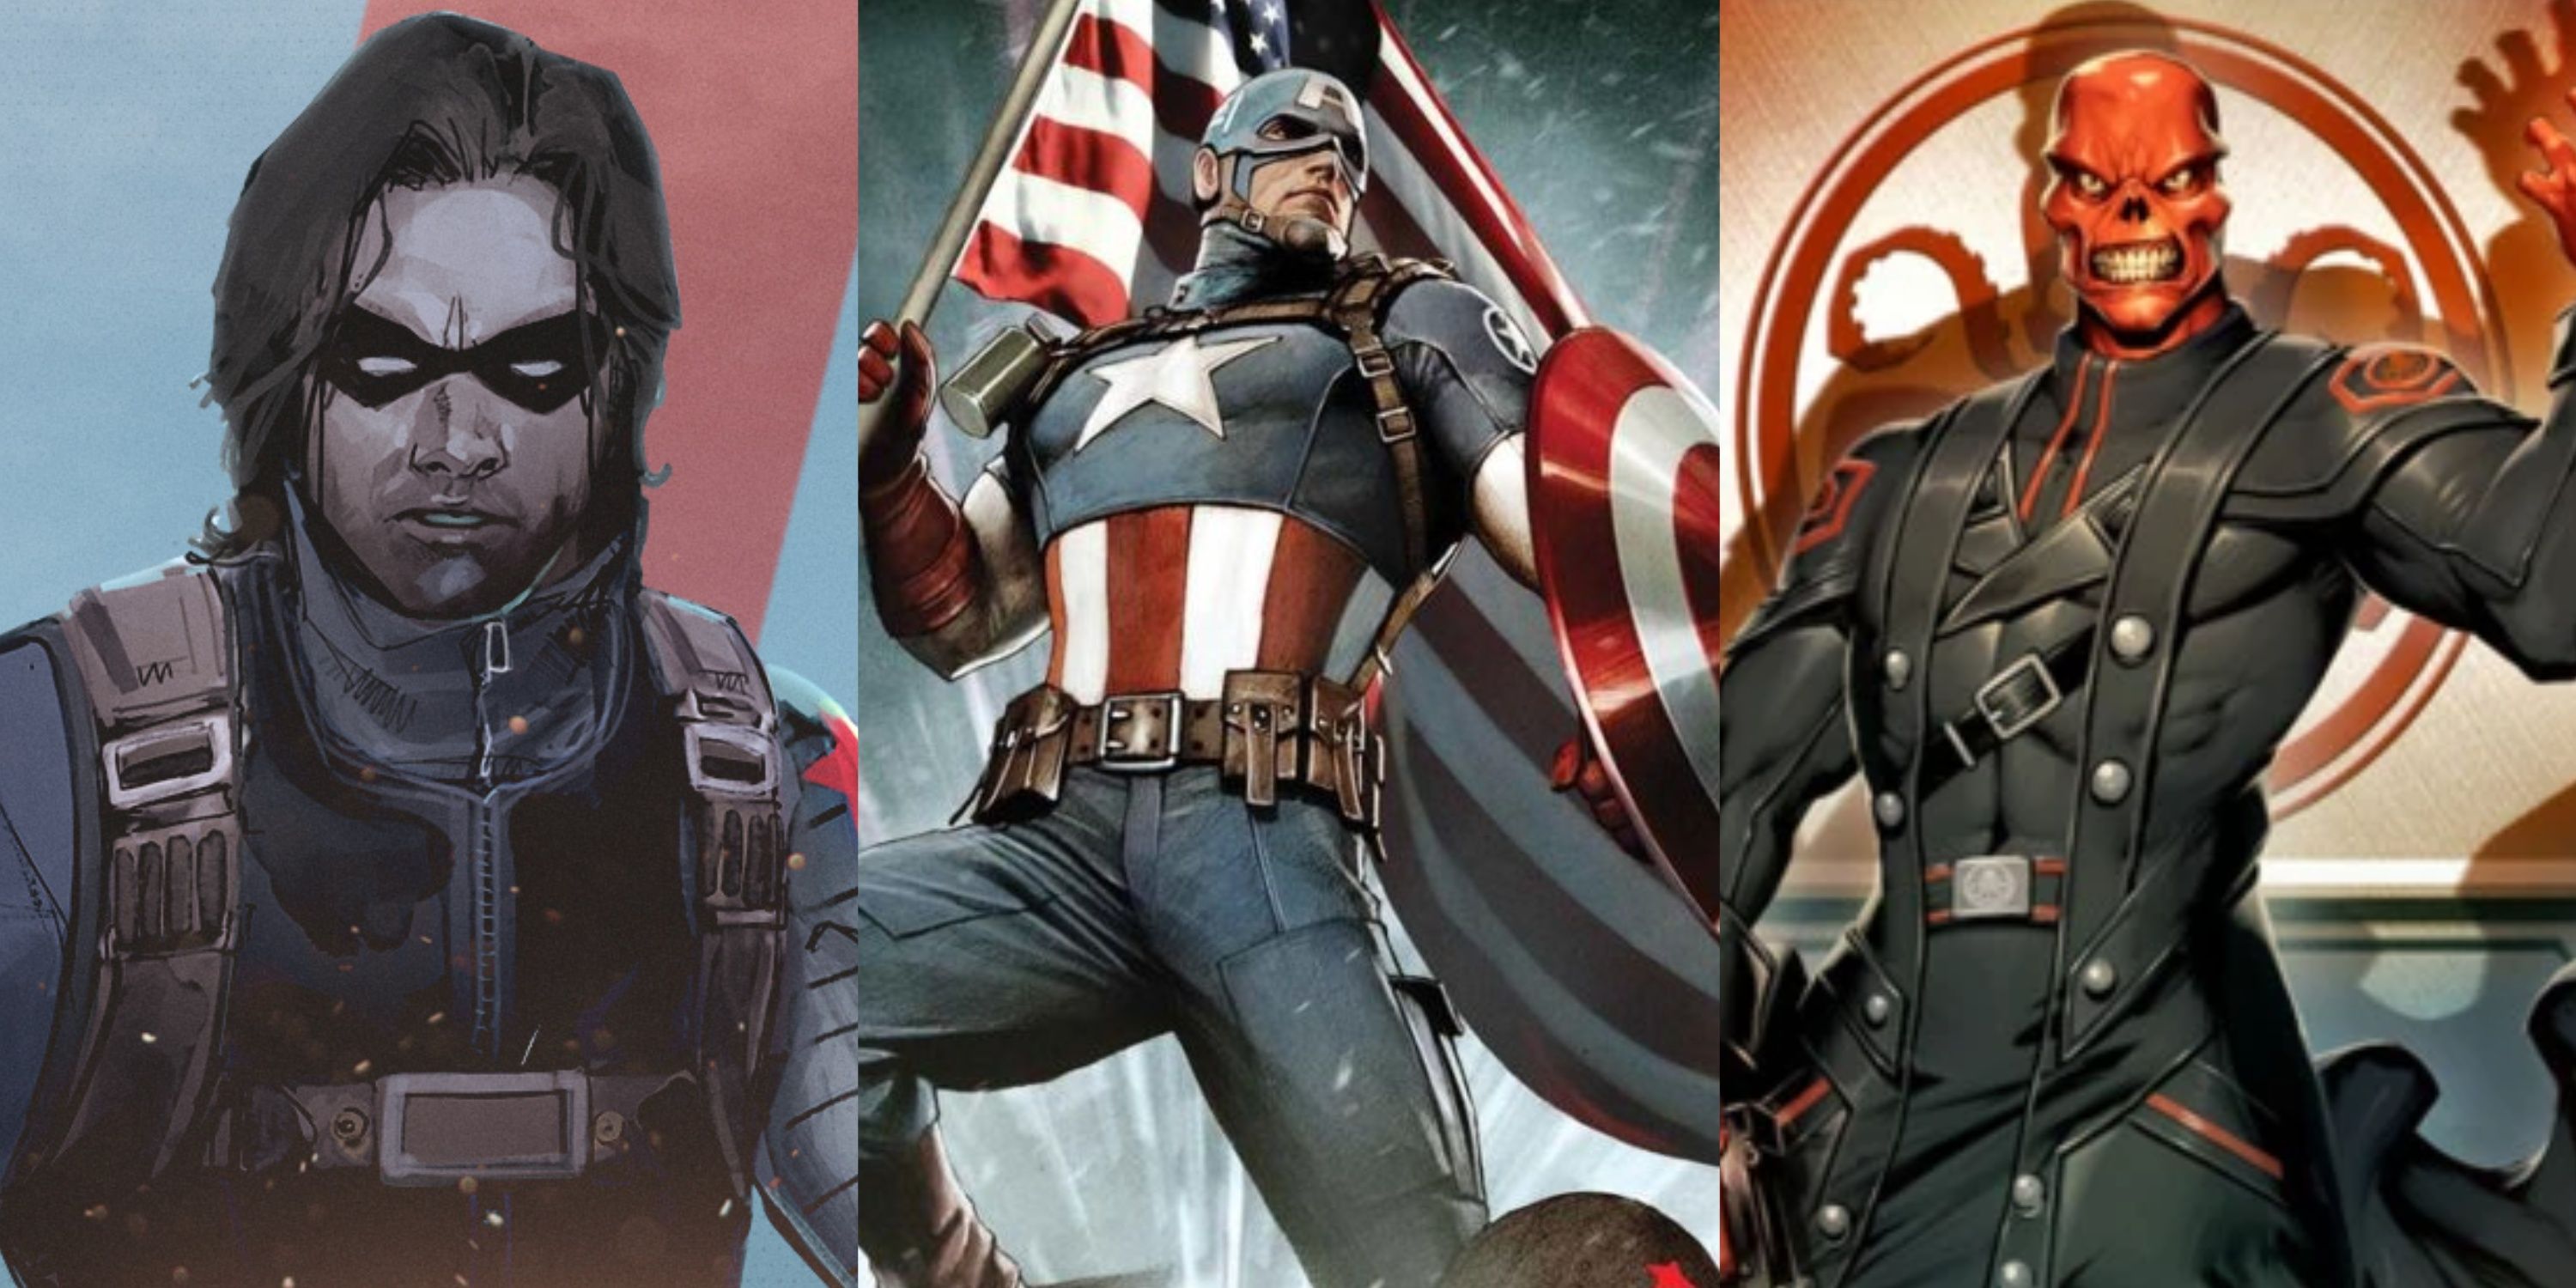 Split image of Bucky as the Winter Soldier, Cap and Red Skull leading Hydra in Marvel comics